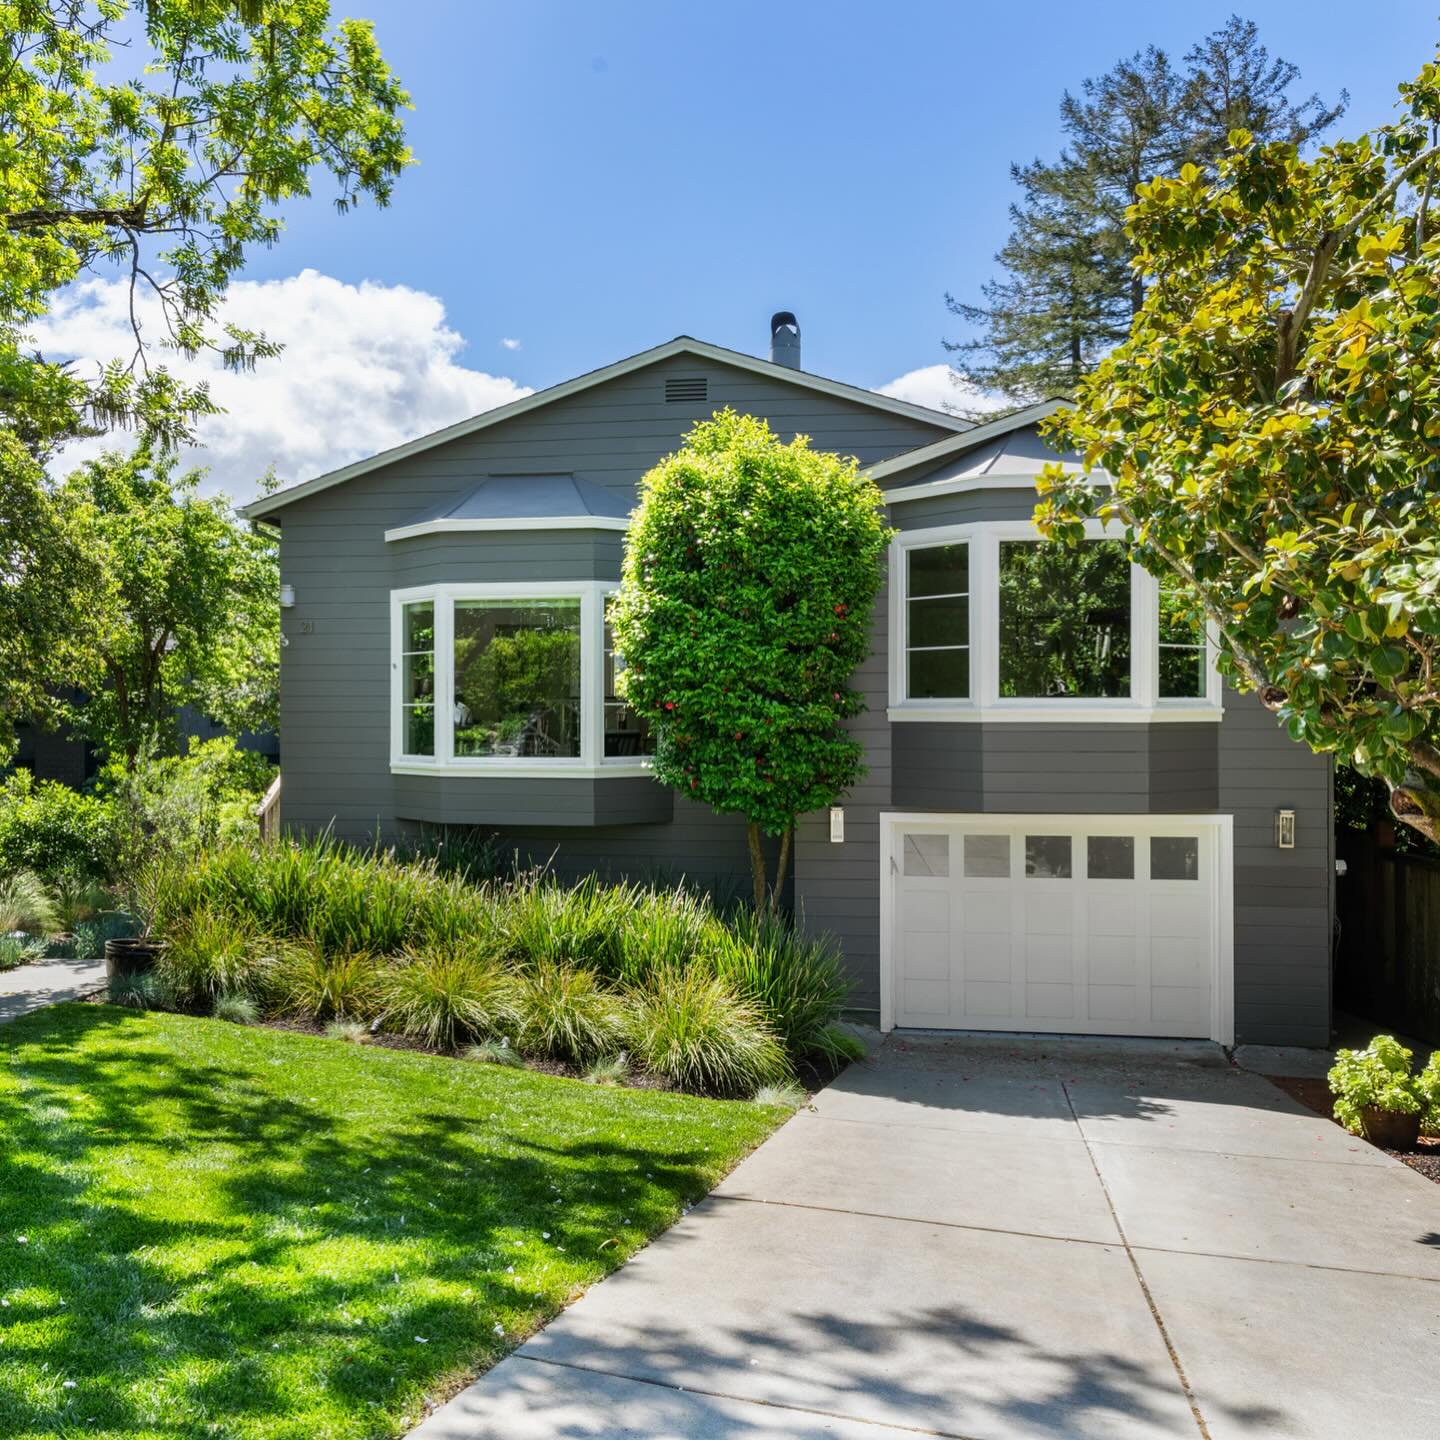 Set in the desirable lower Palm Hill area of Larkspur, 21 Bayview Avenue is a beautifully renovated home offering the ideal blend of style and functionality. 

With 2,623 square feet, it boasts four spacious bedrooms and three updated bathrooms, all 